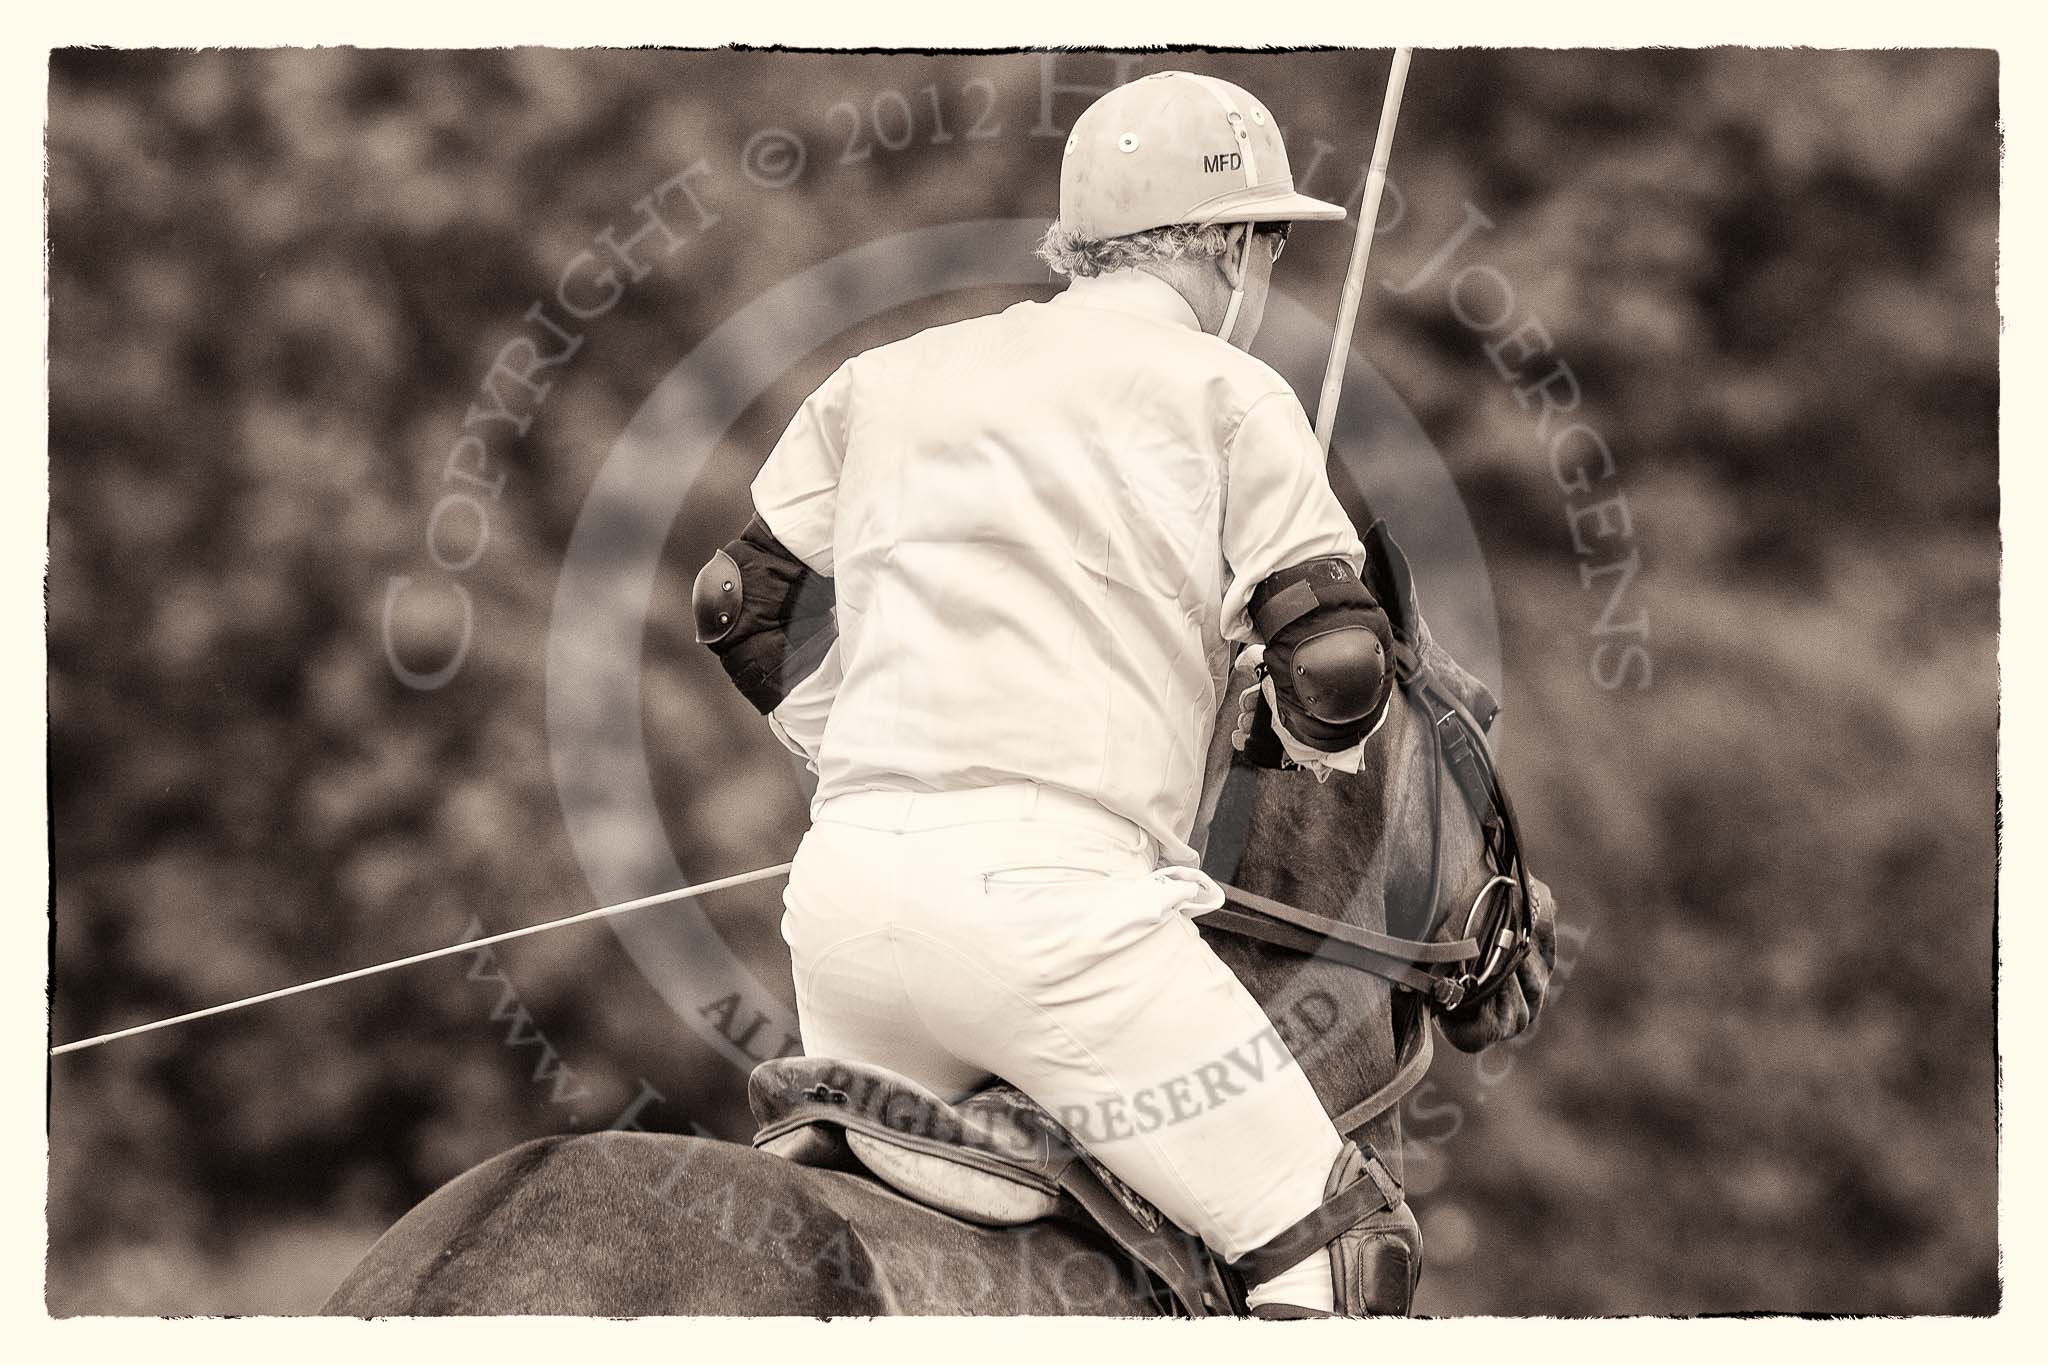 7th Heritage Polo Cup semi-finals: Mariano Darritchon..
Hurtwood Park Polo Club,
Ewhurst Green,
Surrey,
United Kingdom,
on 04 August 2012 at 15:36, image #256